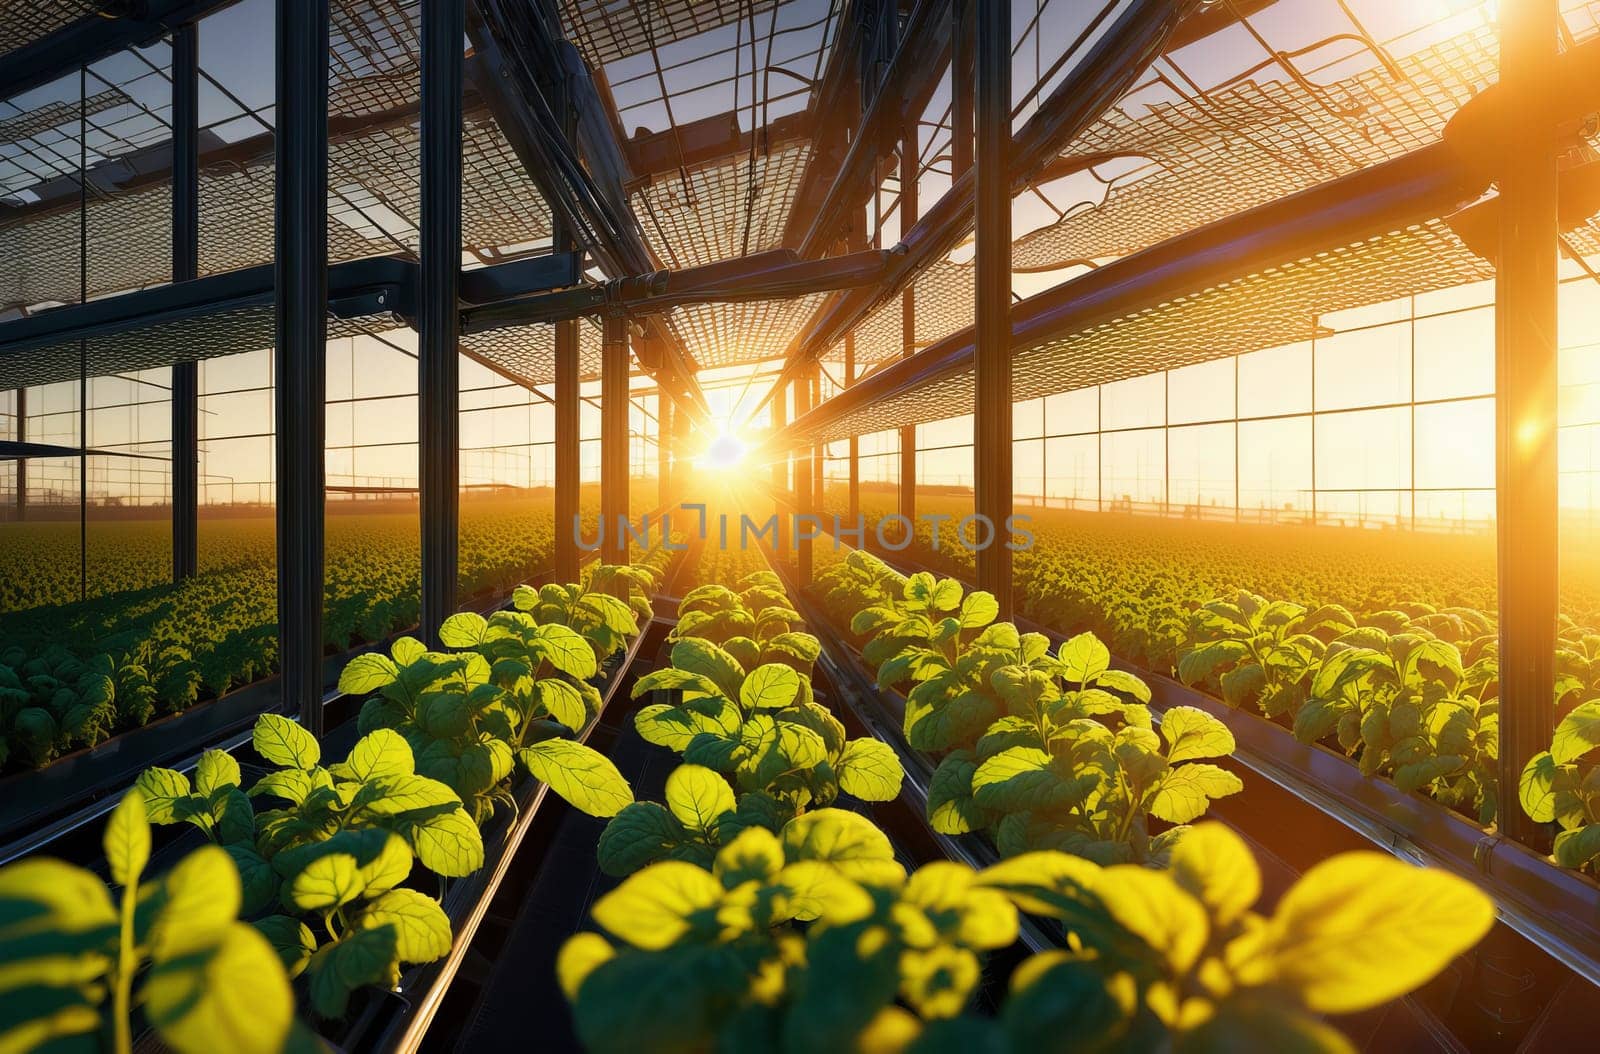 The sunlight is streaming through the windows of a greenhouse, illuminating the plants and flowers with its warm glow